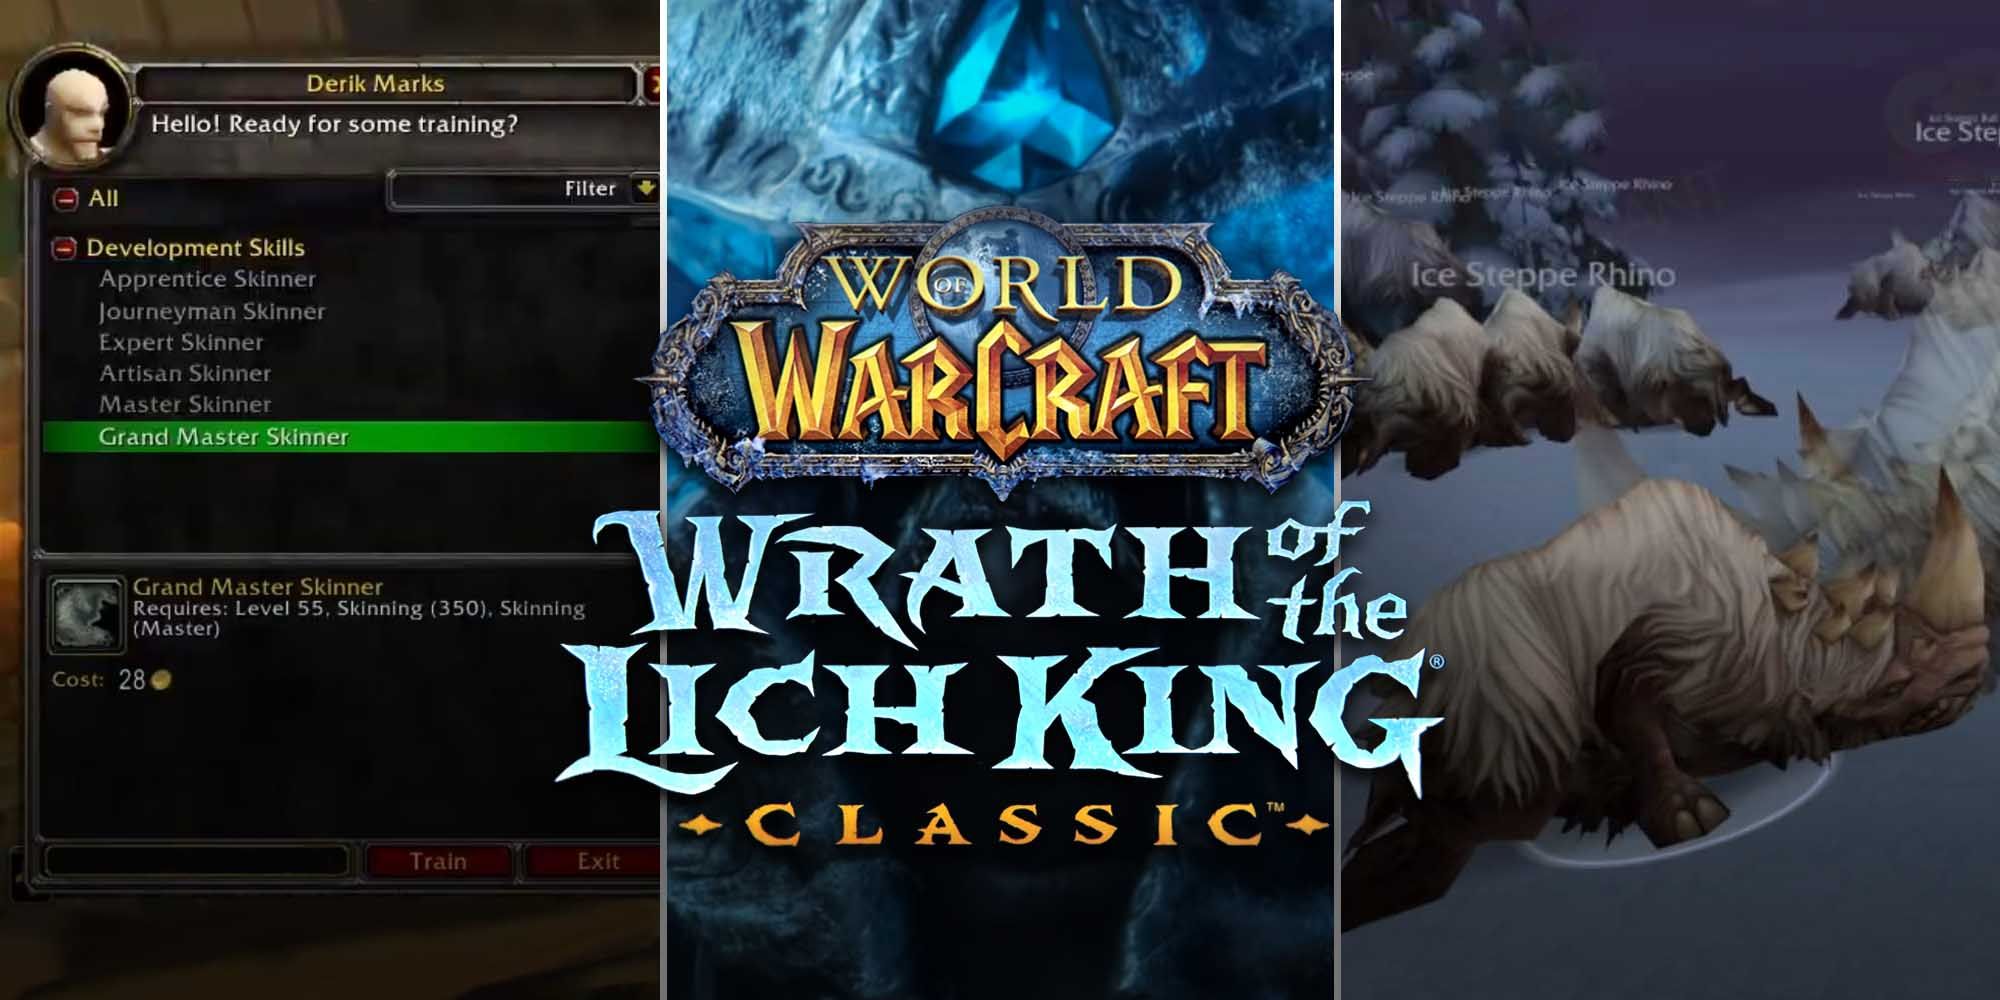 WoW Classic: A Complete Professions Guide